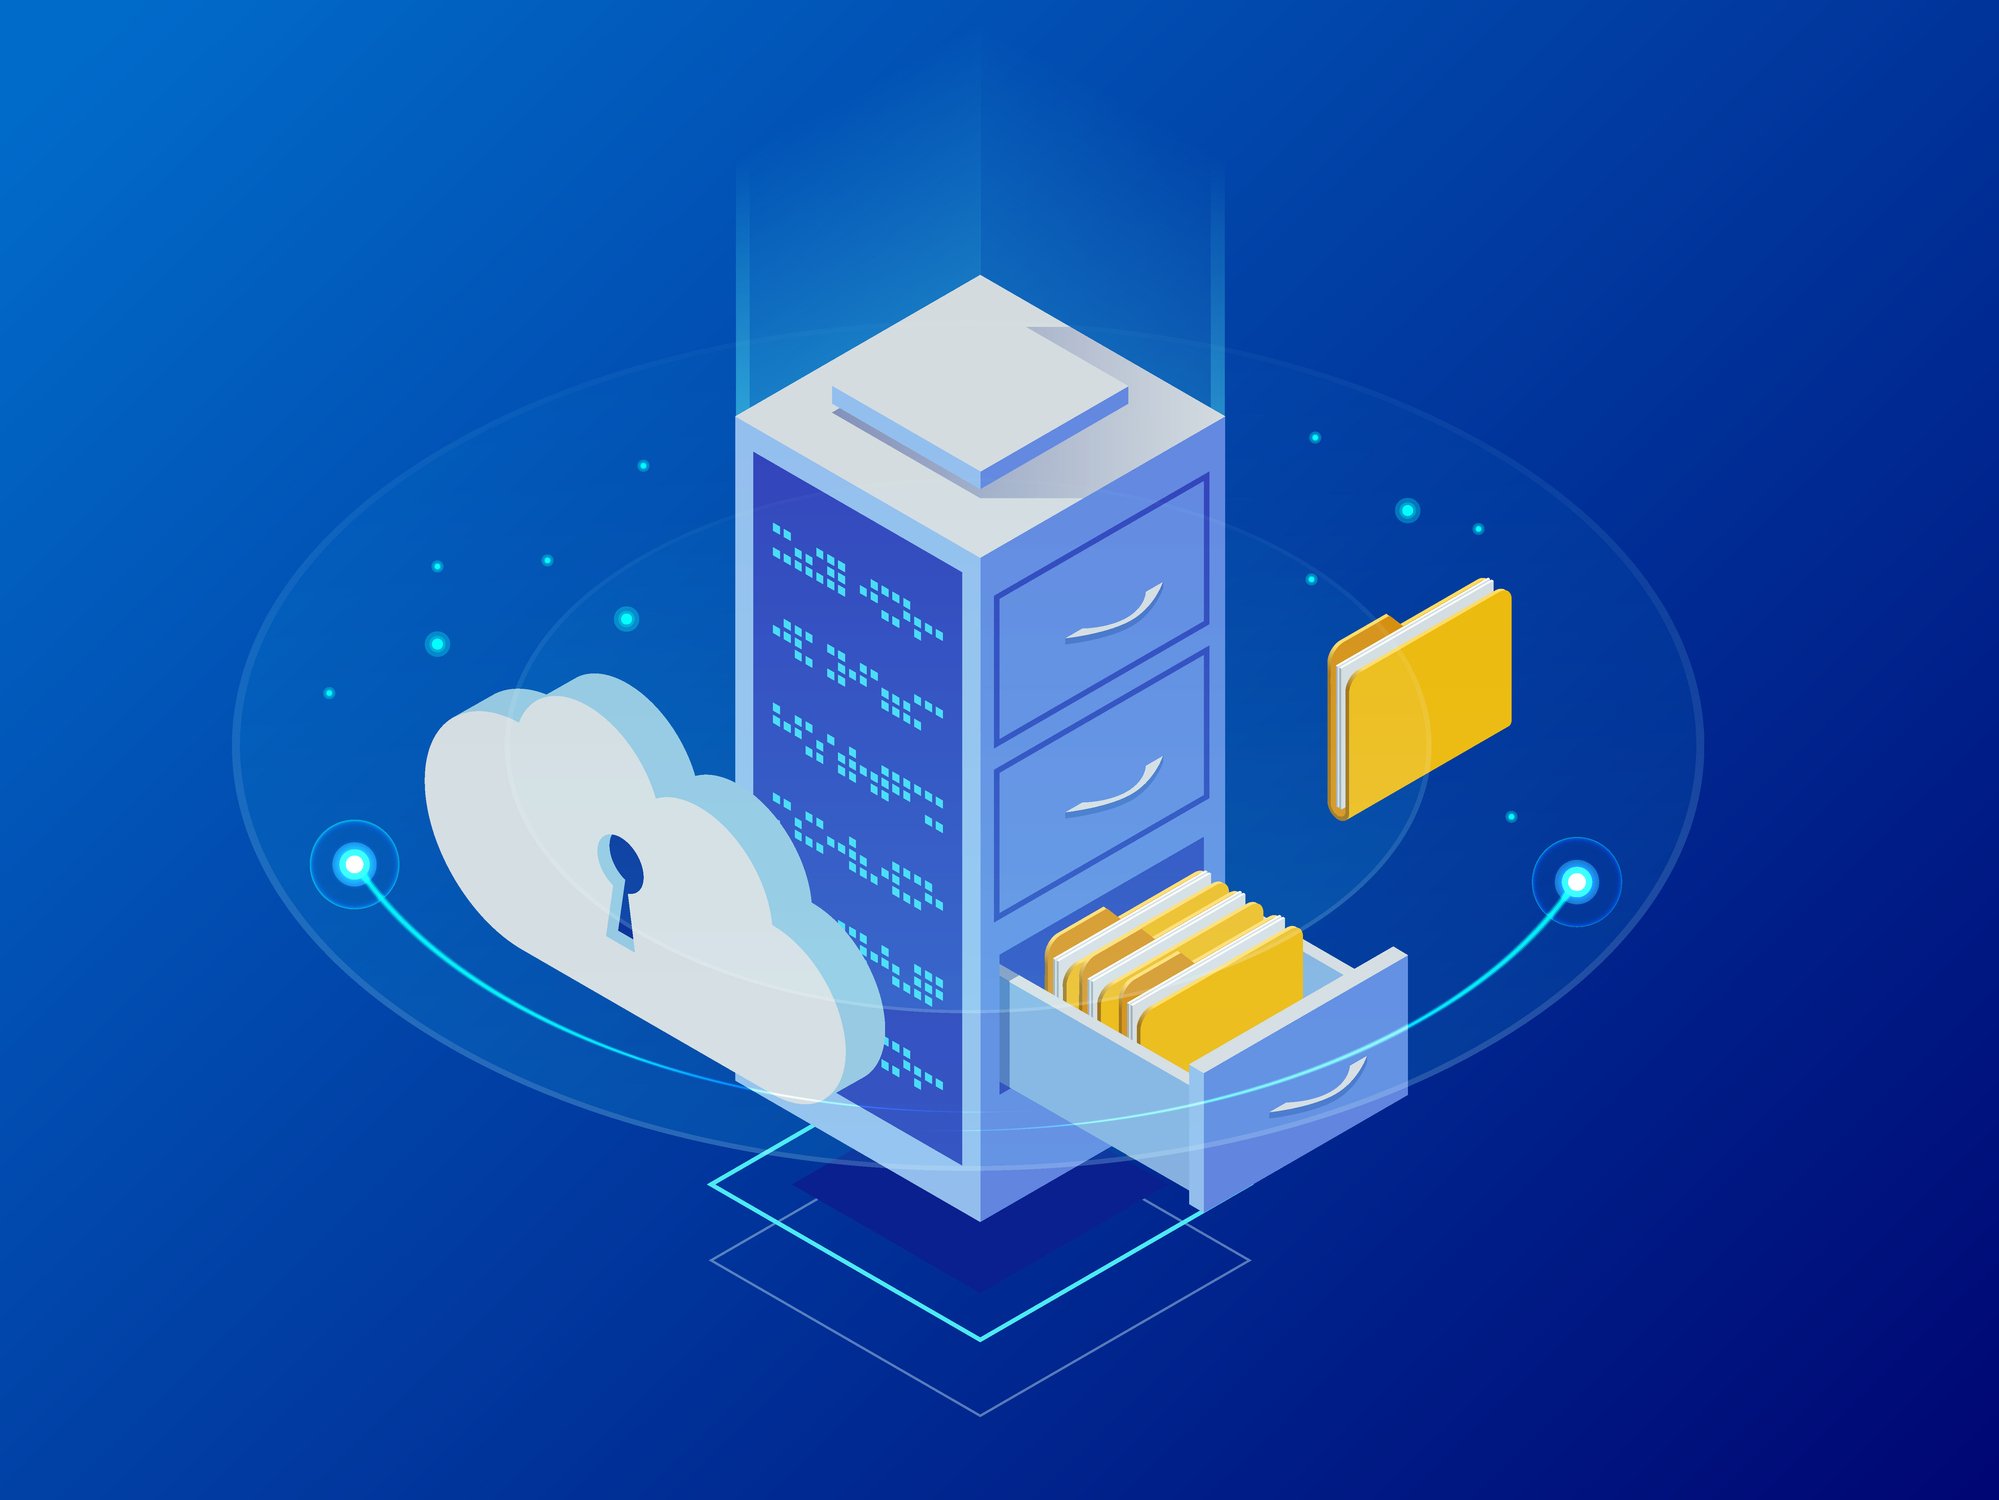 Create a backup of your important files and folders on a separate storage device or cloud storage.
Set up automated backups to ensure your data is consistently protected.